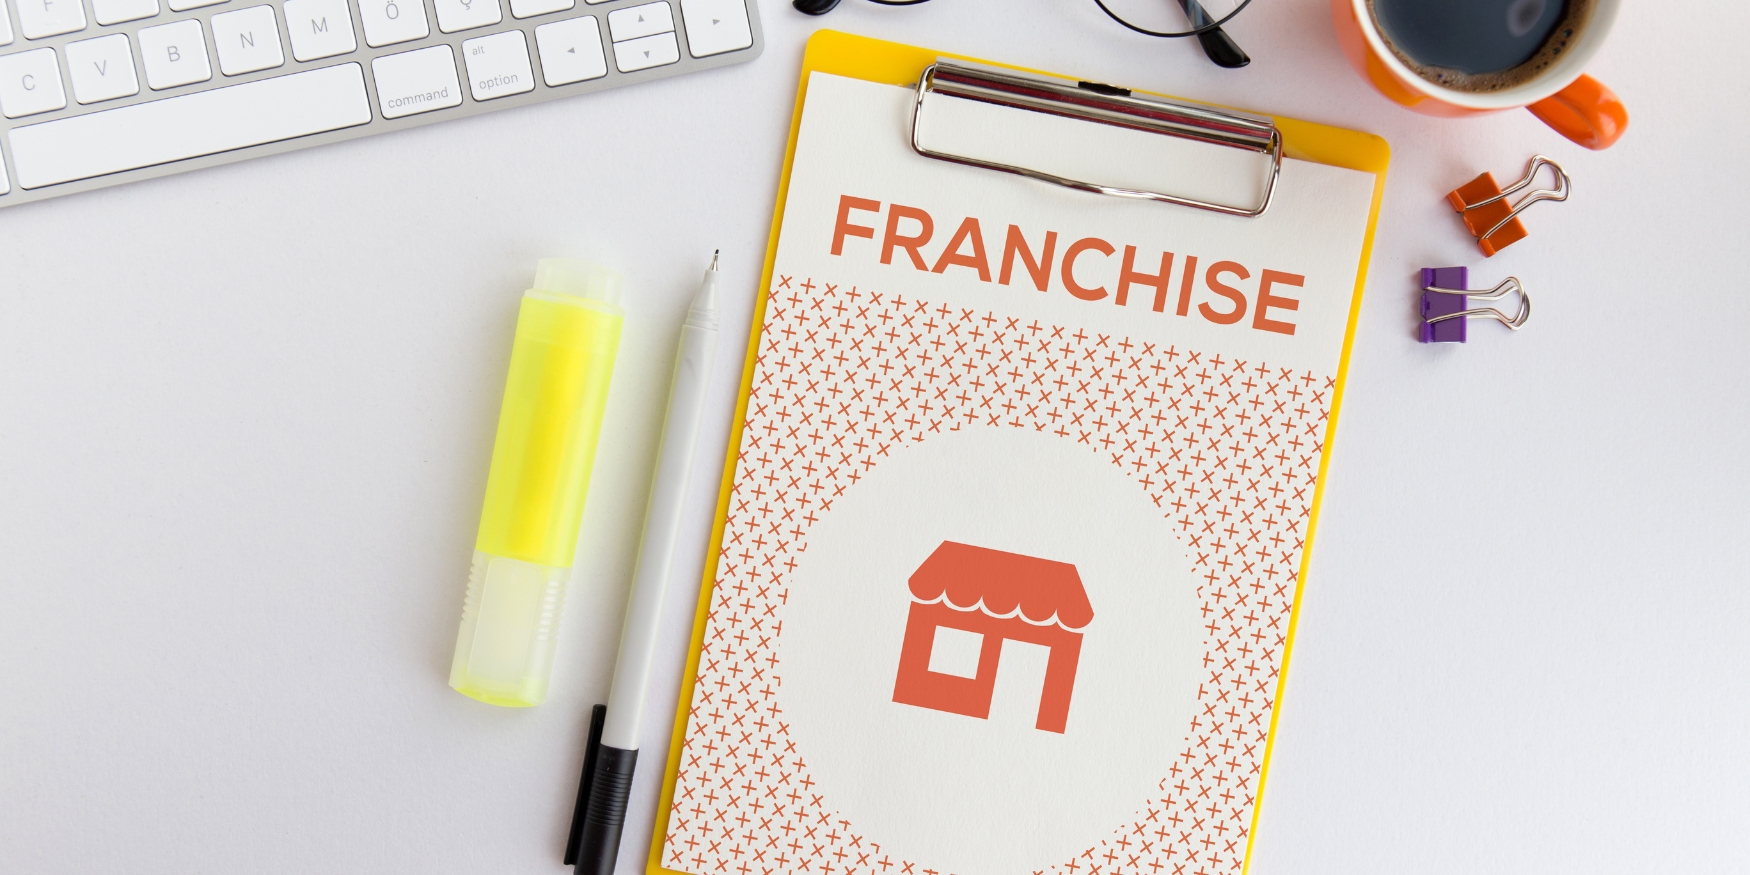  Franchising Code of Conduct